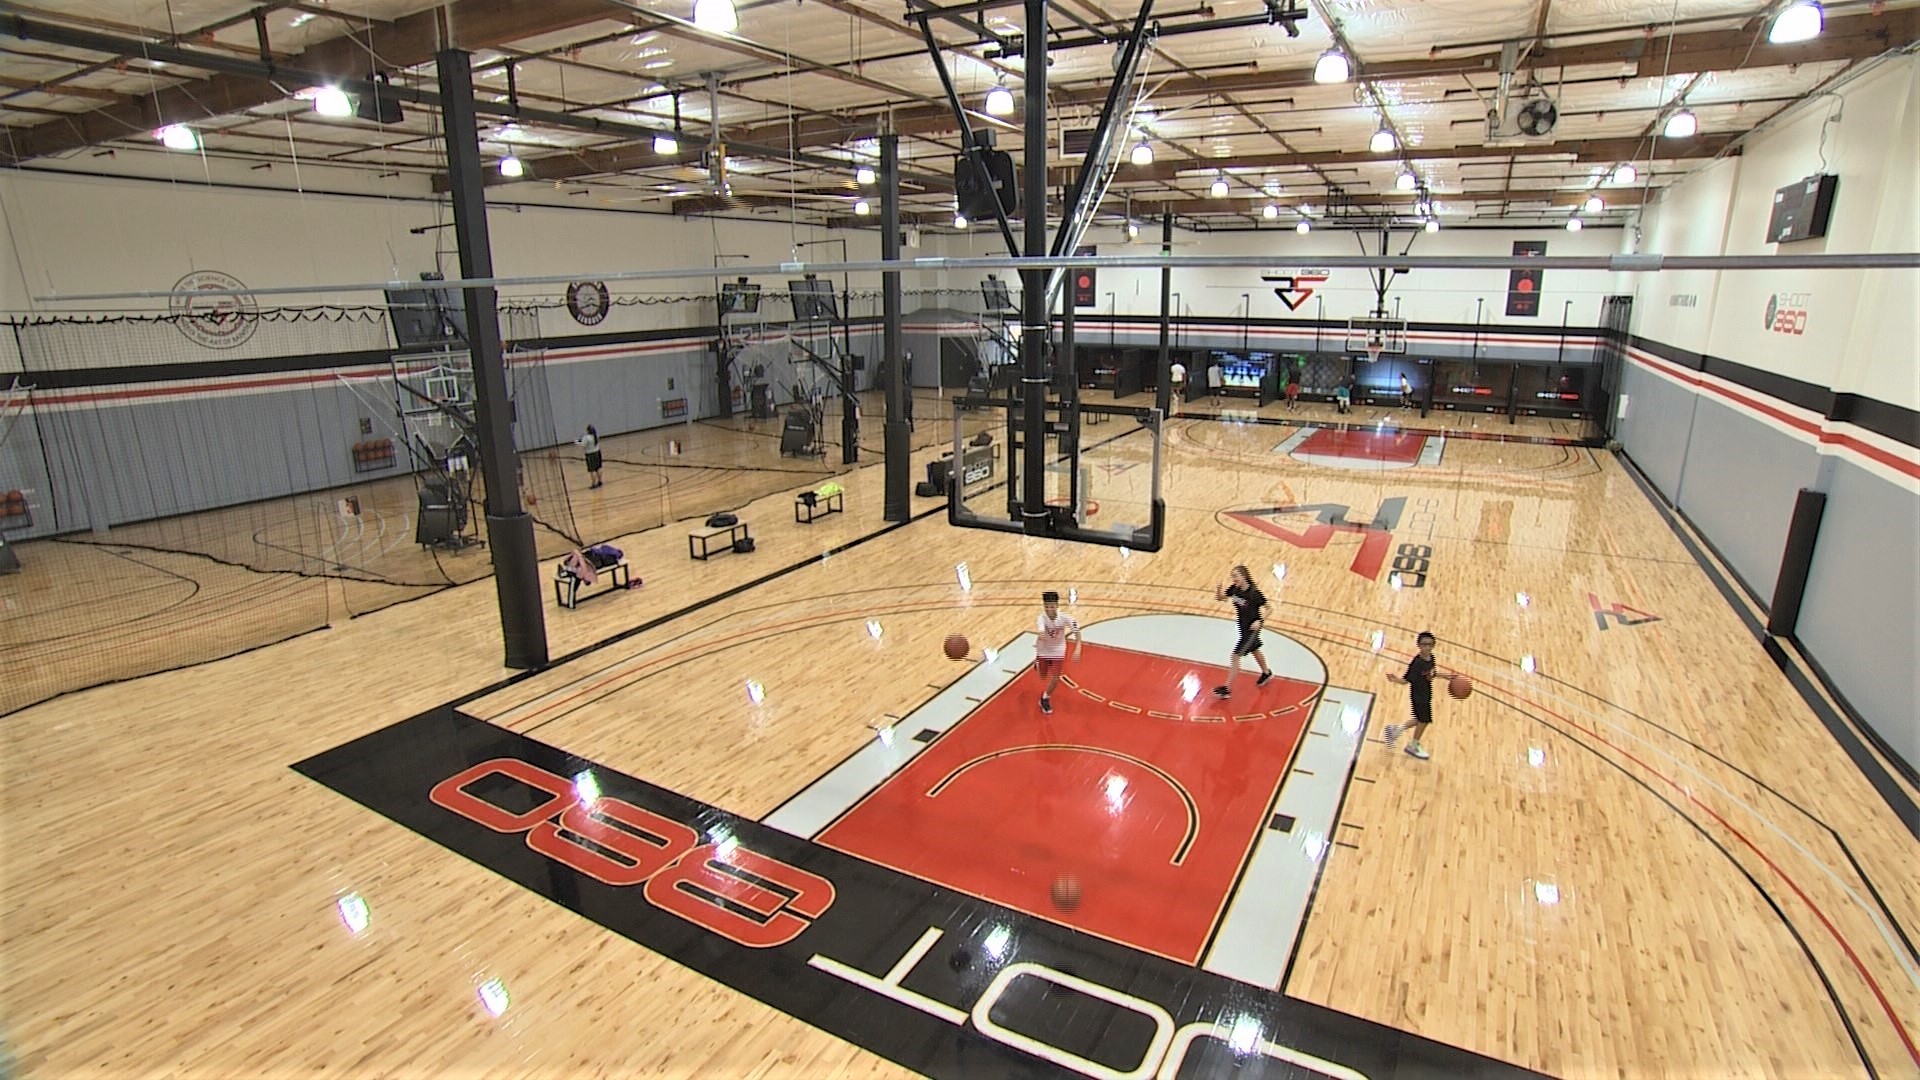 Shoot 360 uses interactive technology to help athletes train